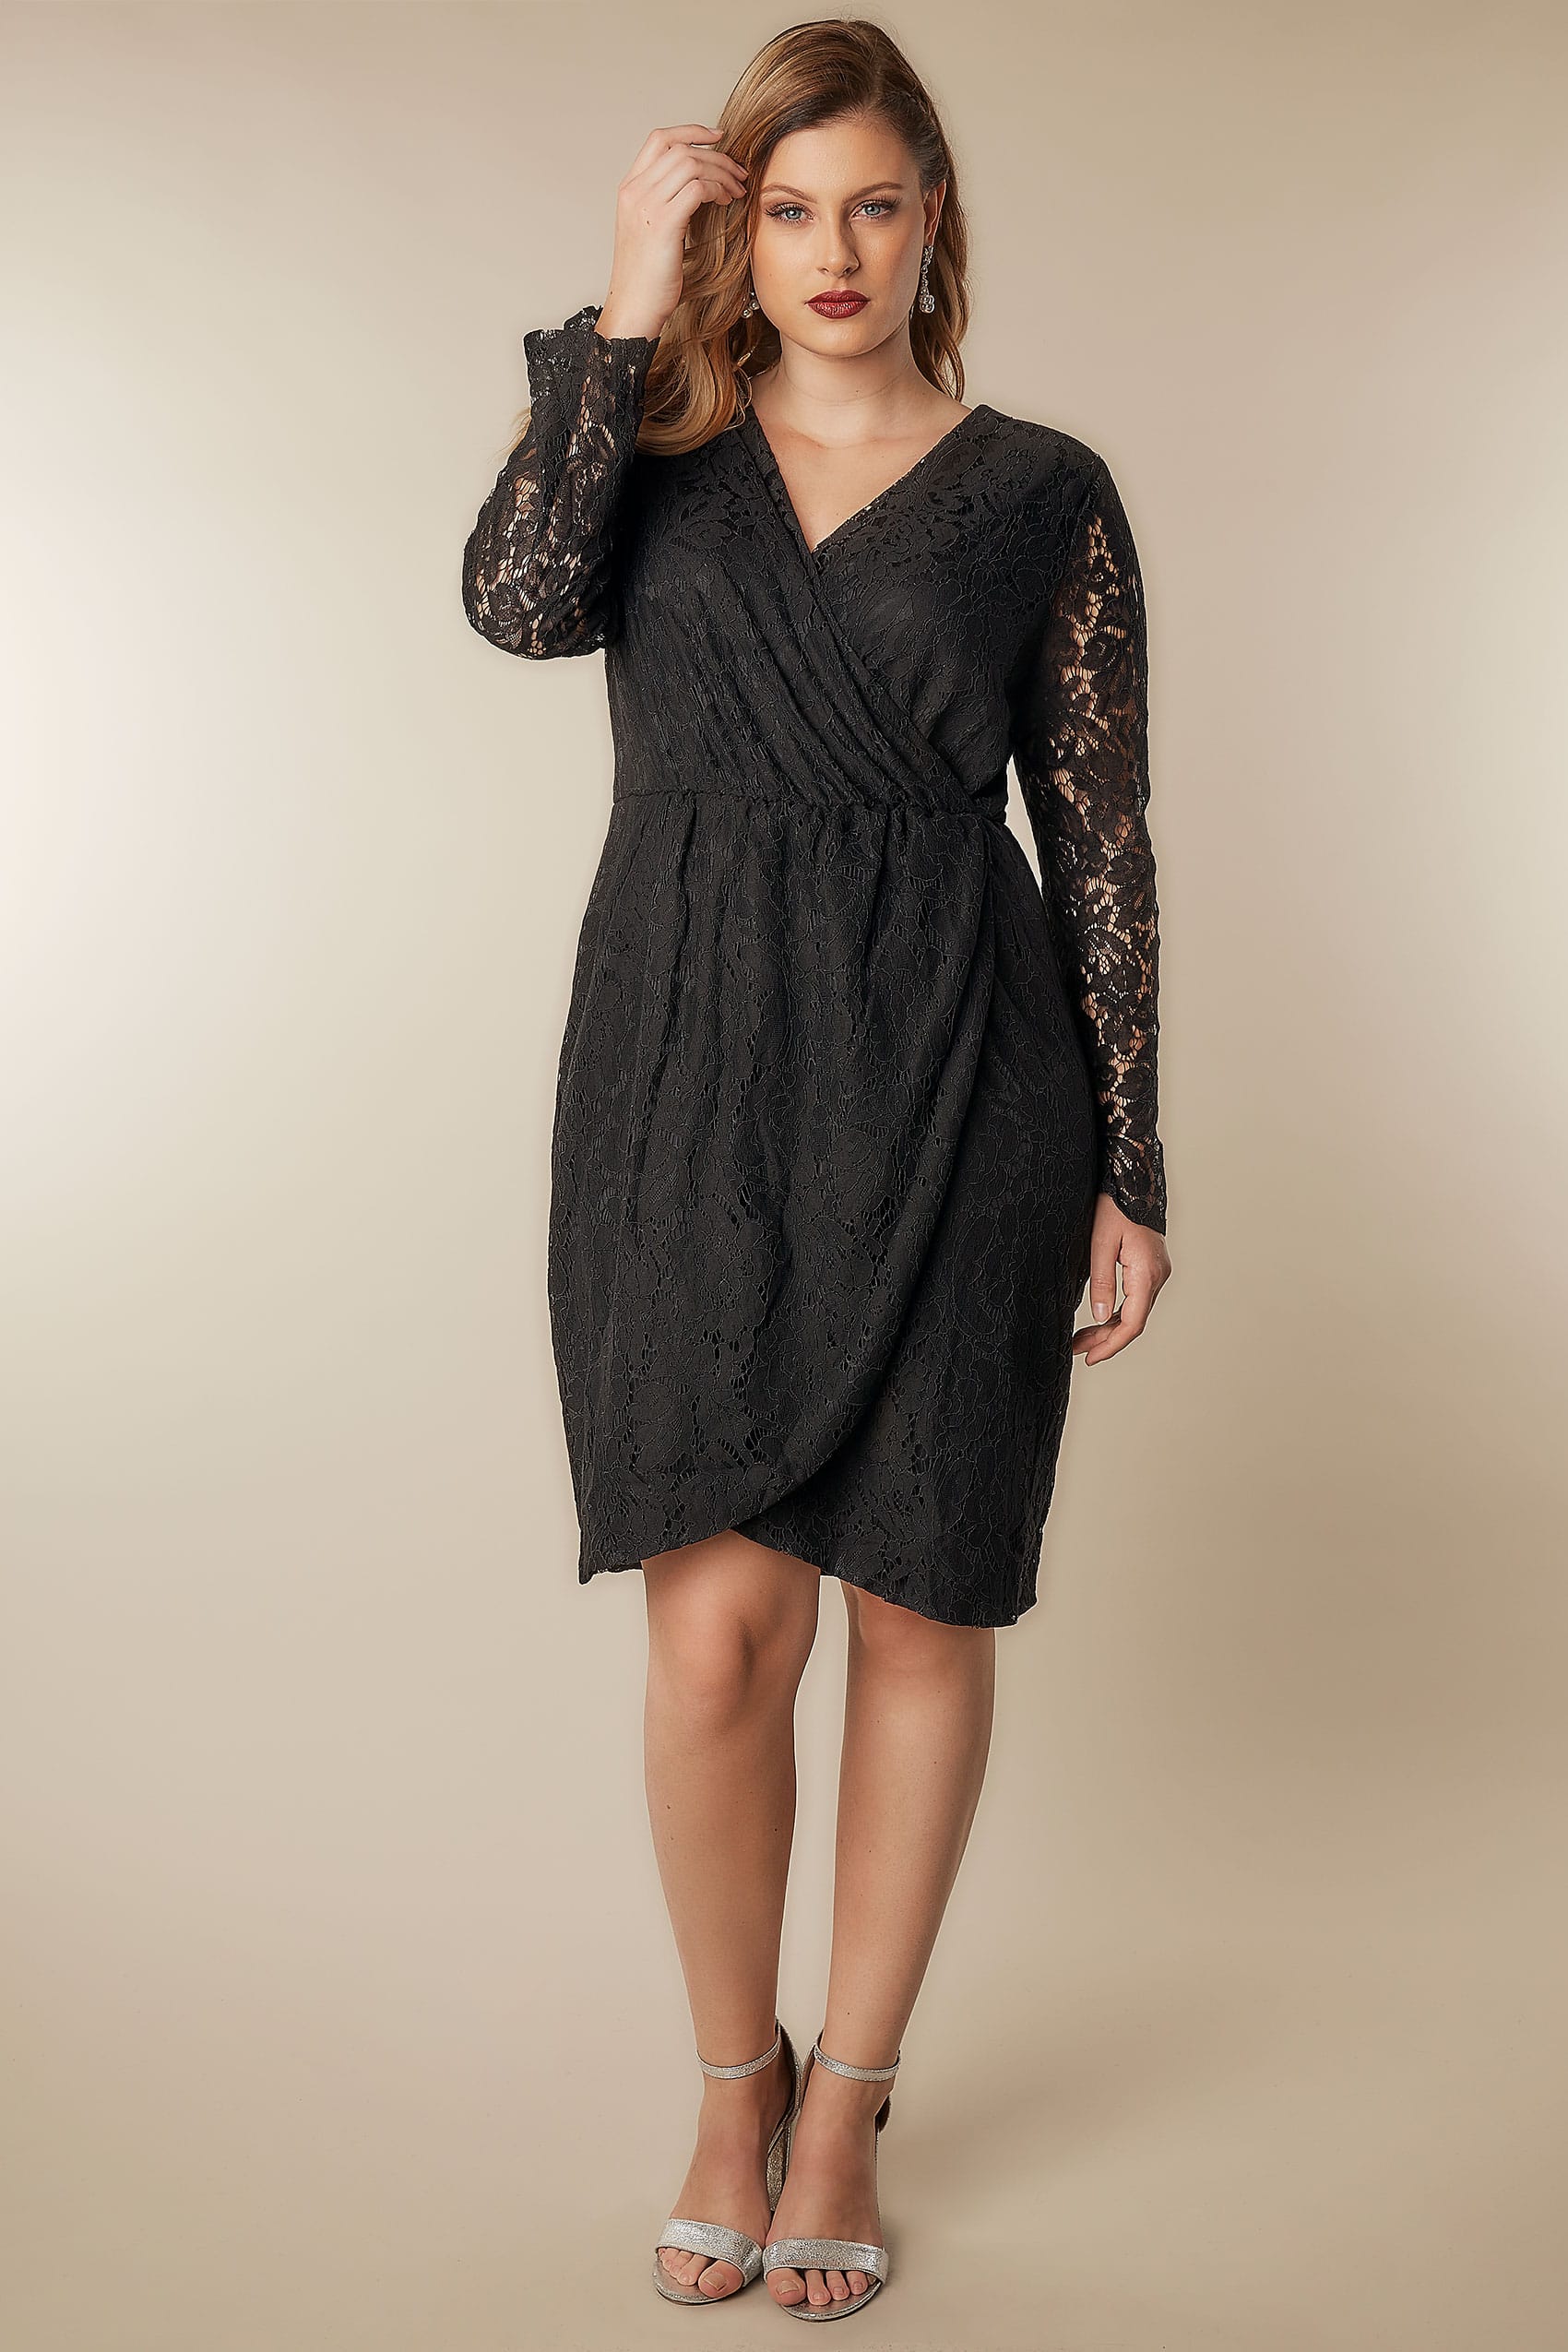 black dress size 18 with sleeves